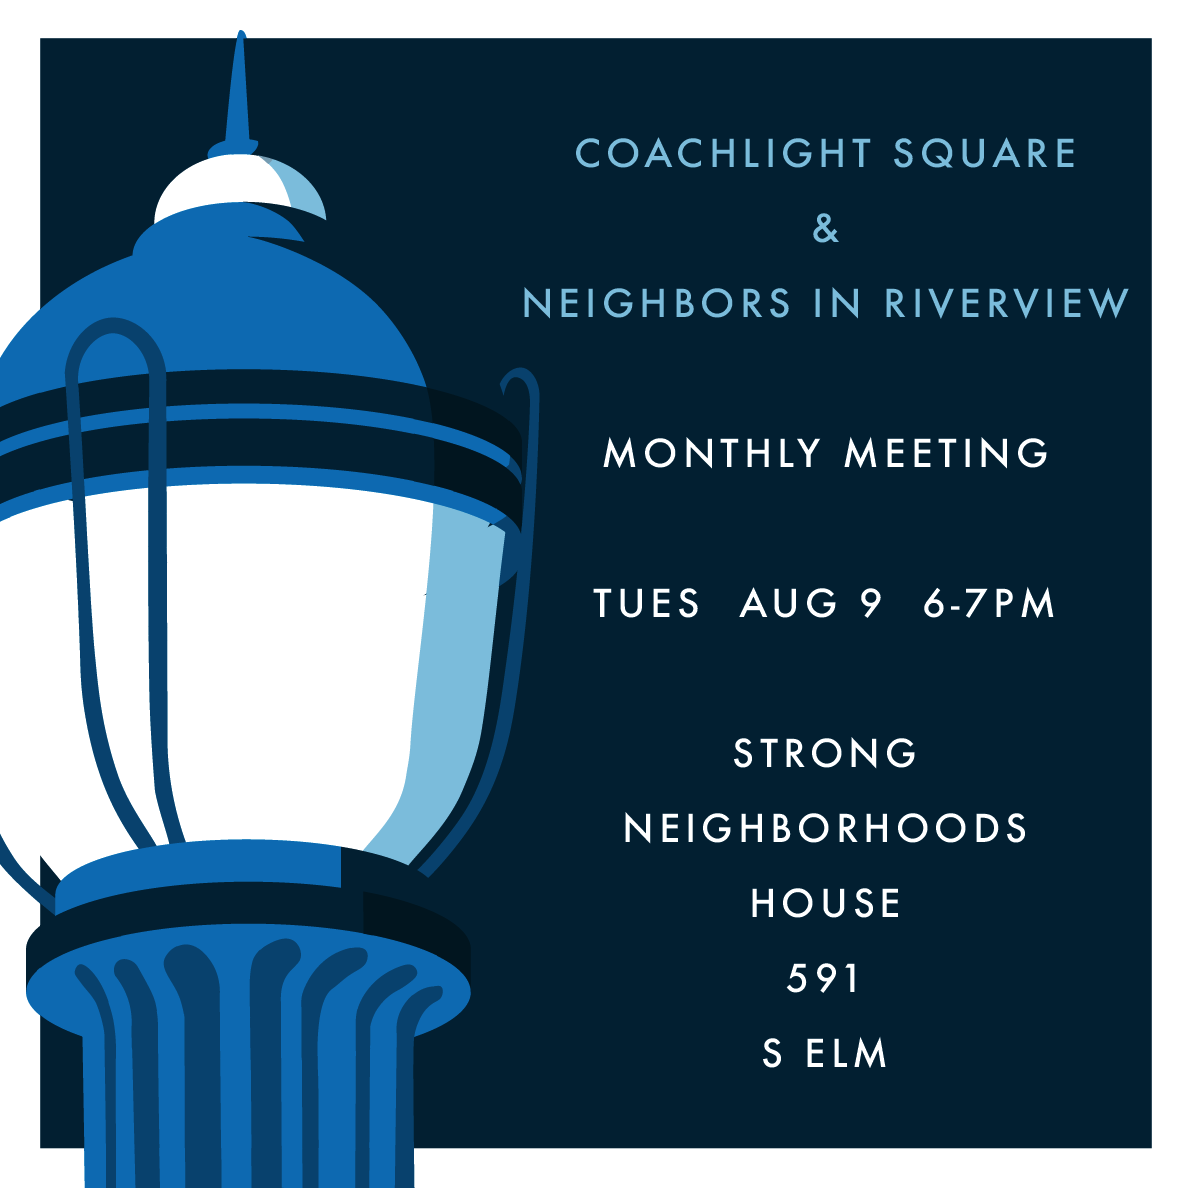 Coachlight Square/Neighbors in Riverview - August Meeting